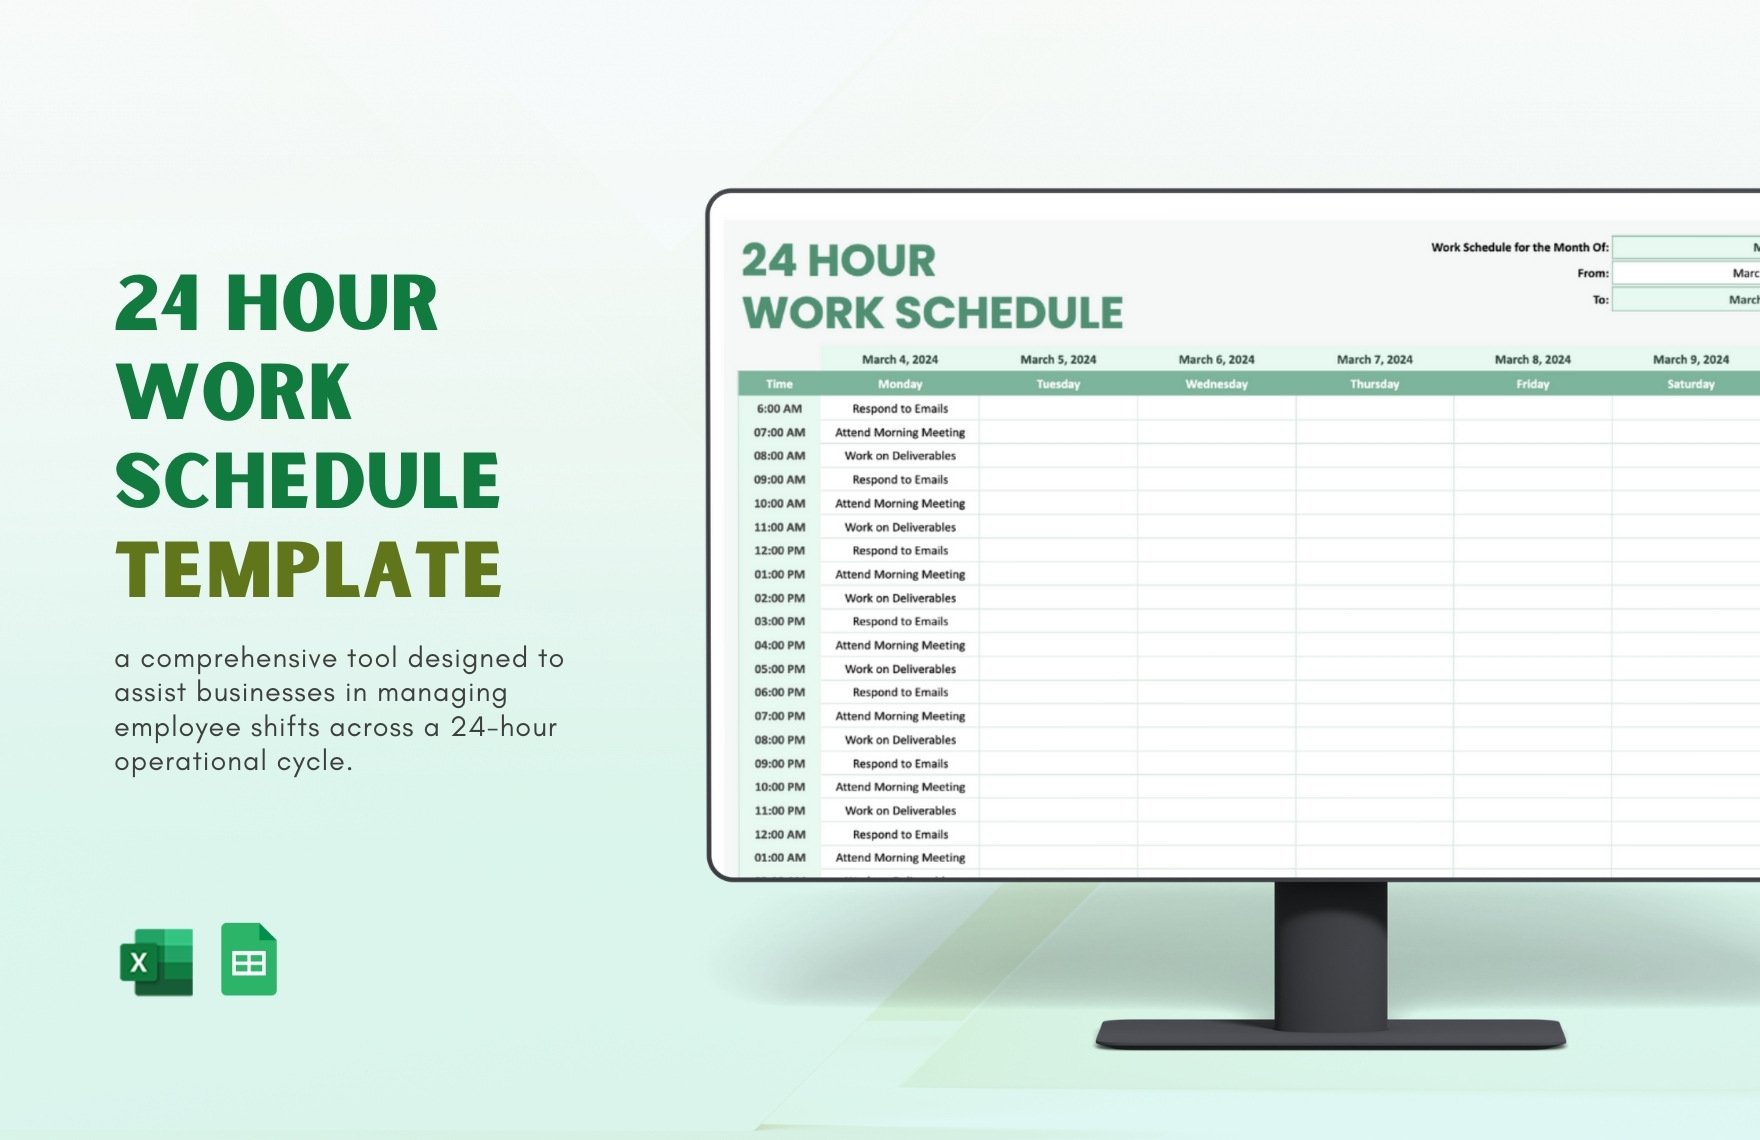 24 Hour Work Schedule Template in Excel, Google Sheets